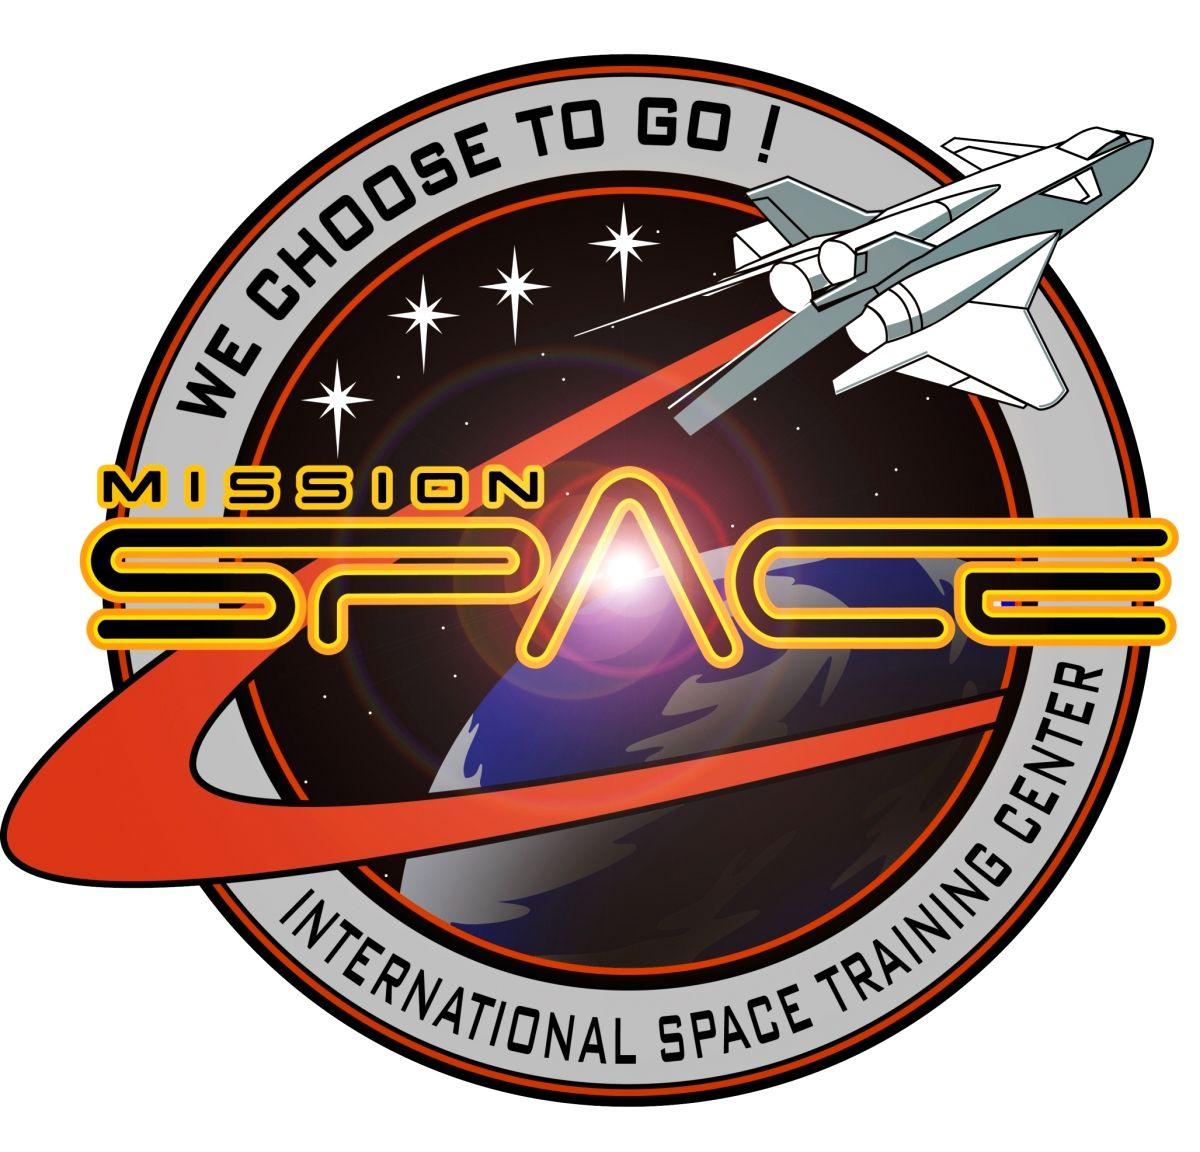 Space Mission Logo - WDWThemeParks.com: SPACE Green Intense Training